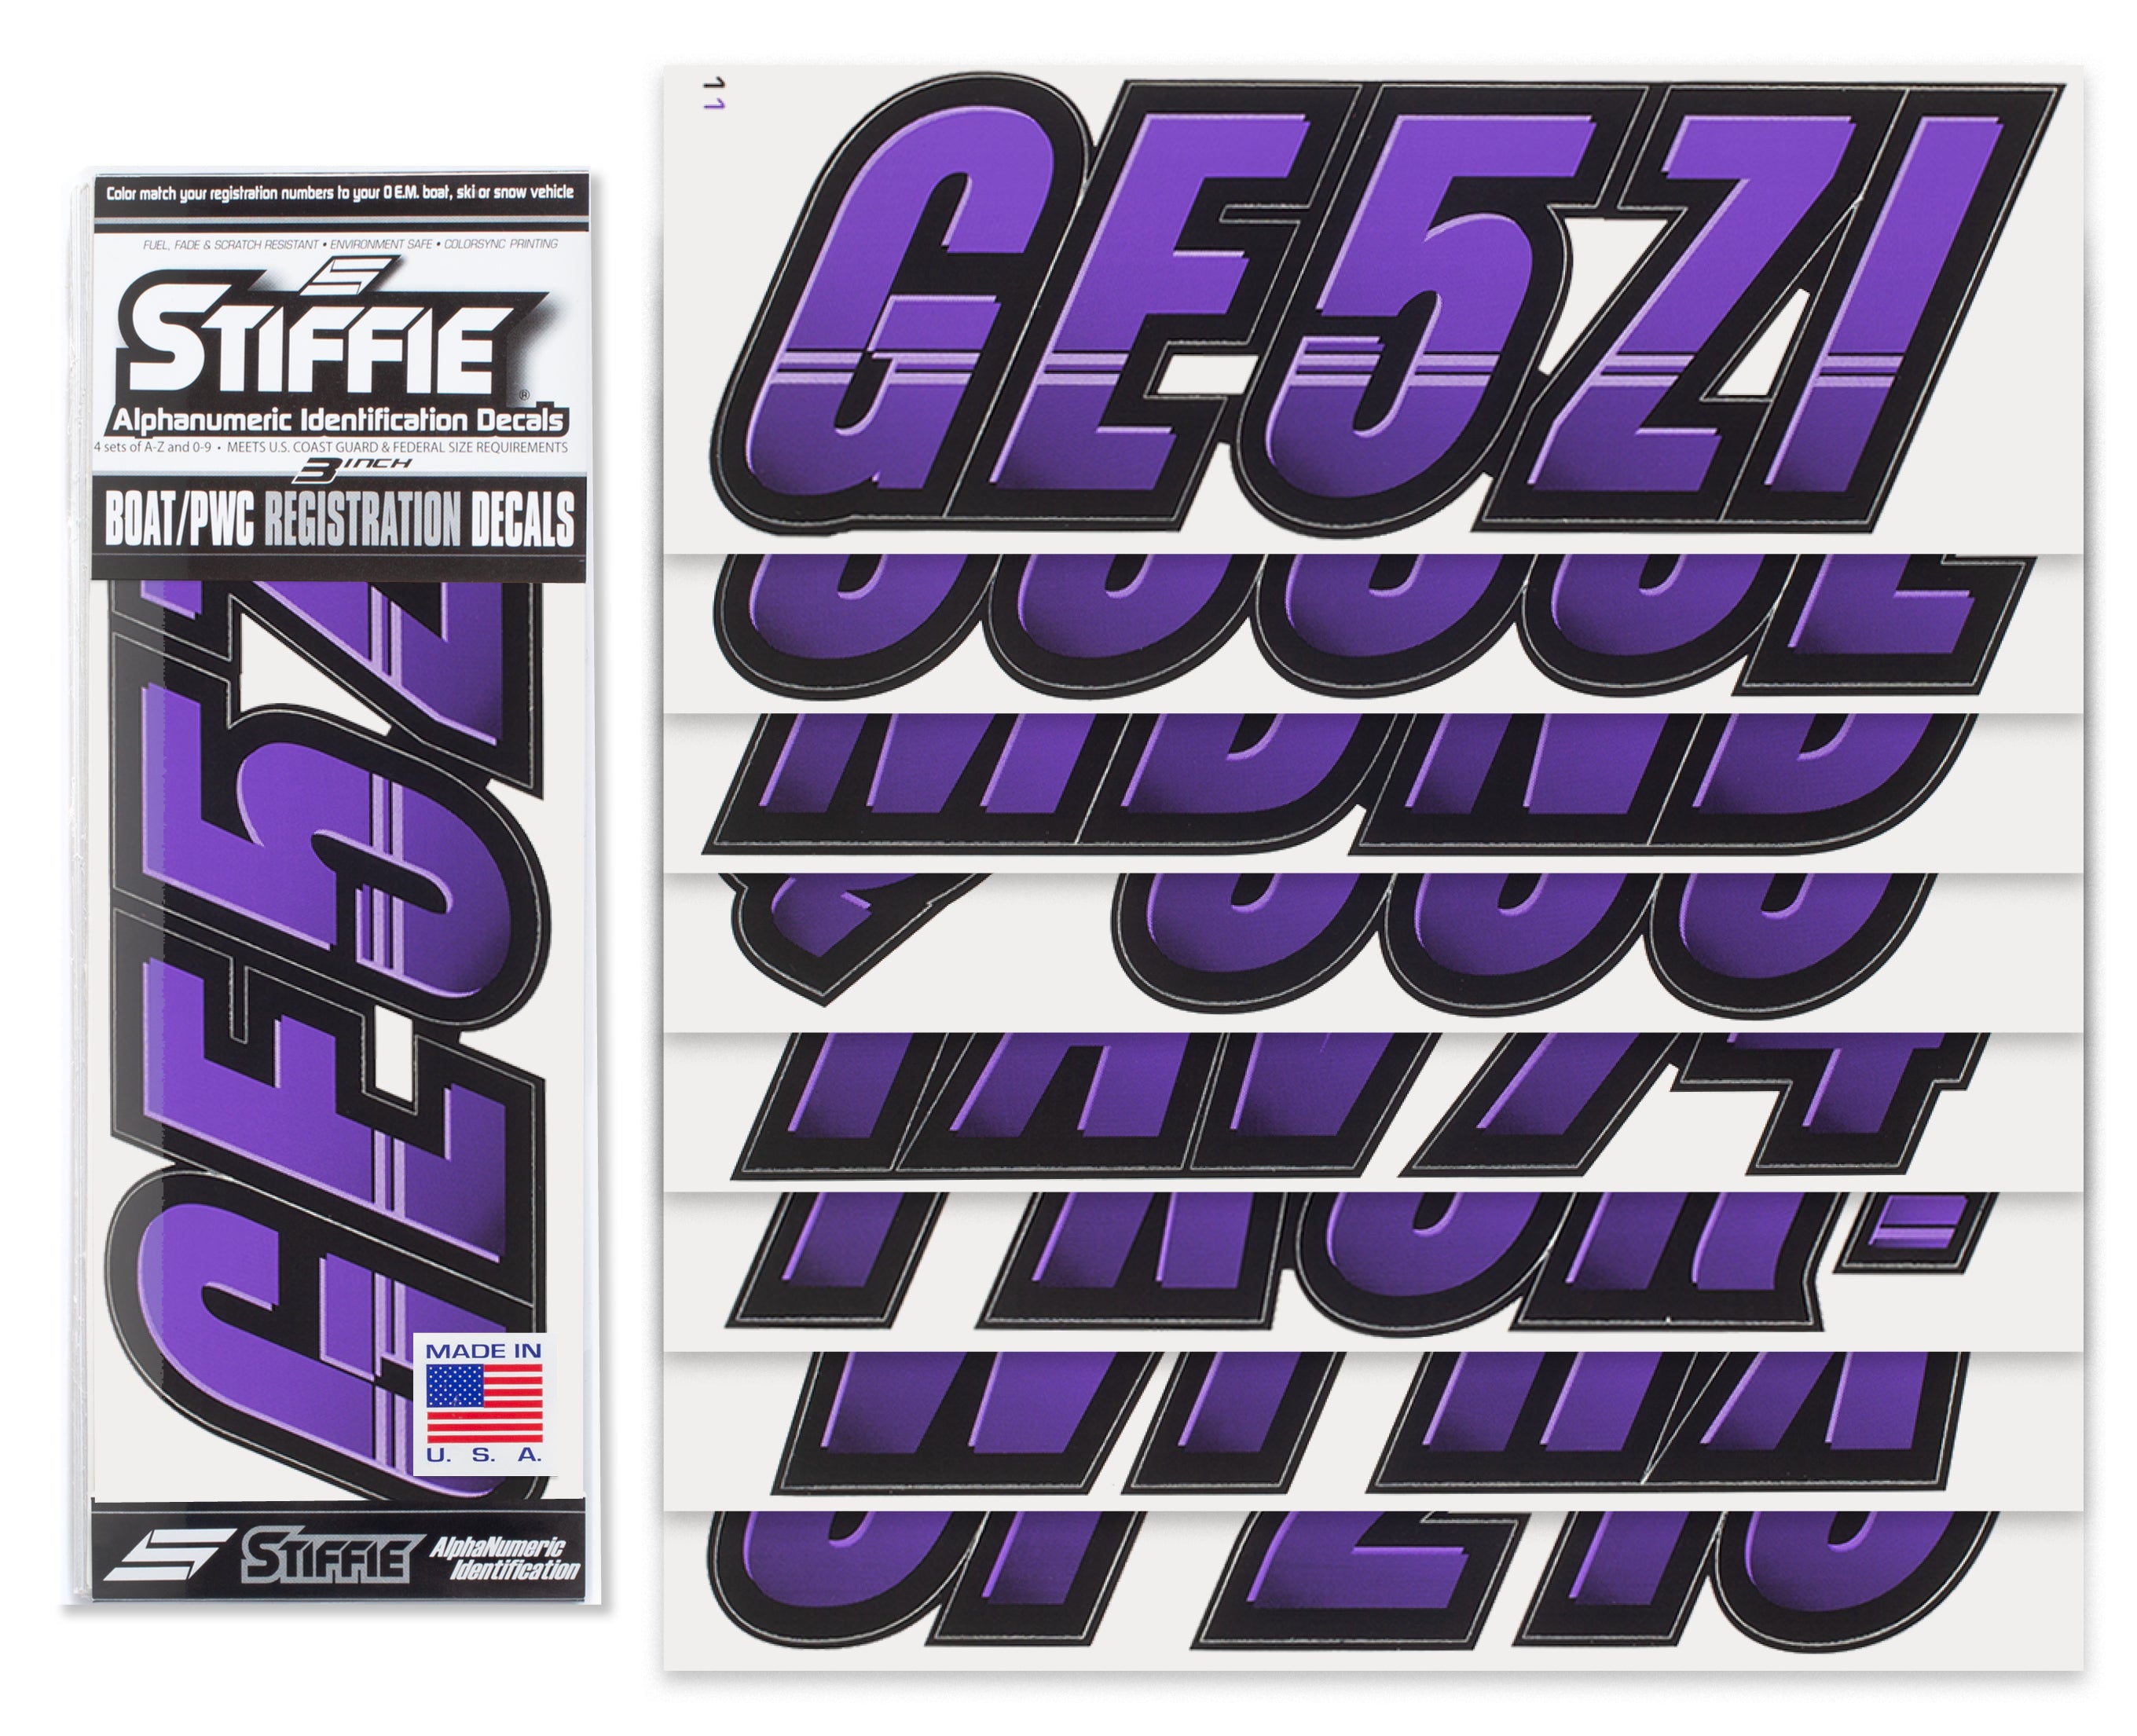 Stiffie Techtron Purple/Black 3" Alpha-Numeric Registration Identification Numbers Stickers Decals for Boats & Personal Watercraft